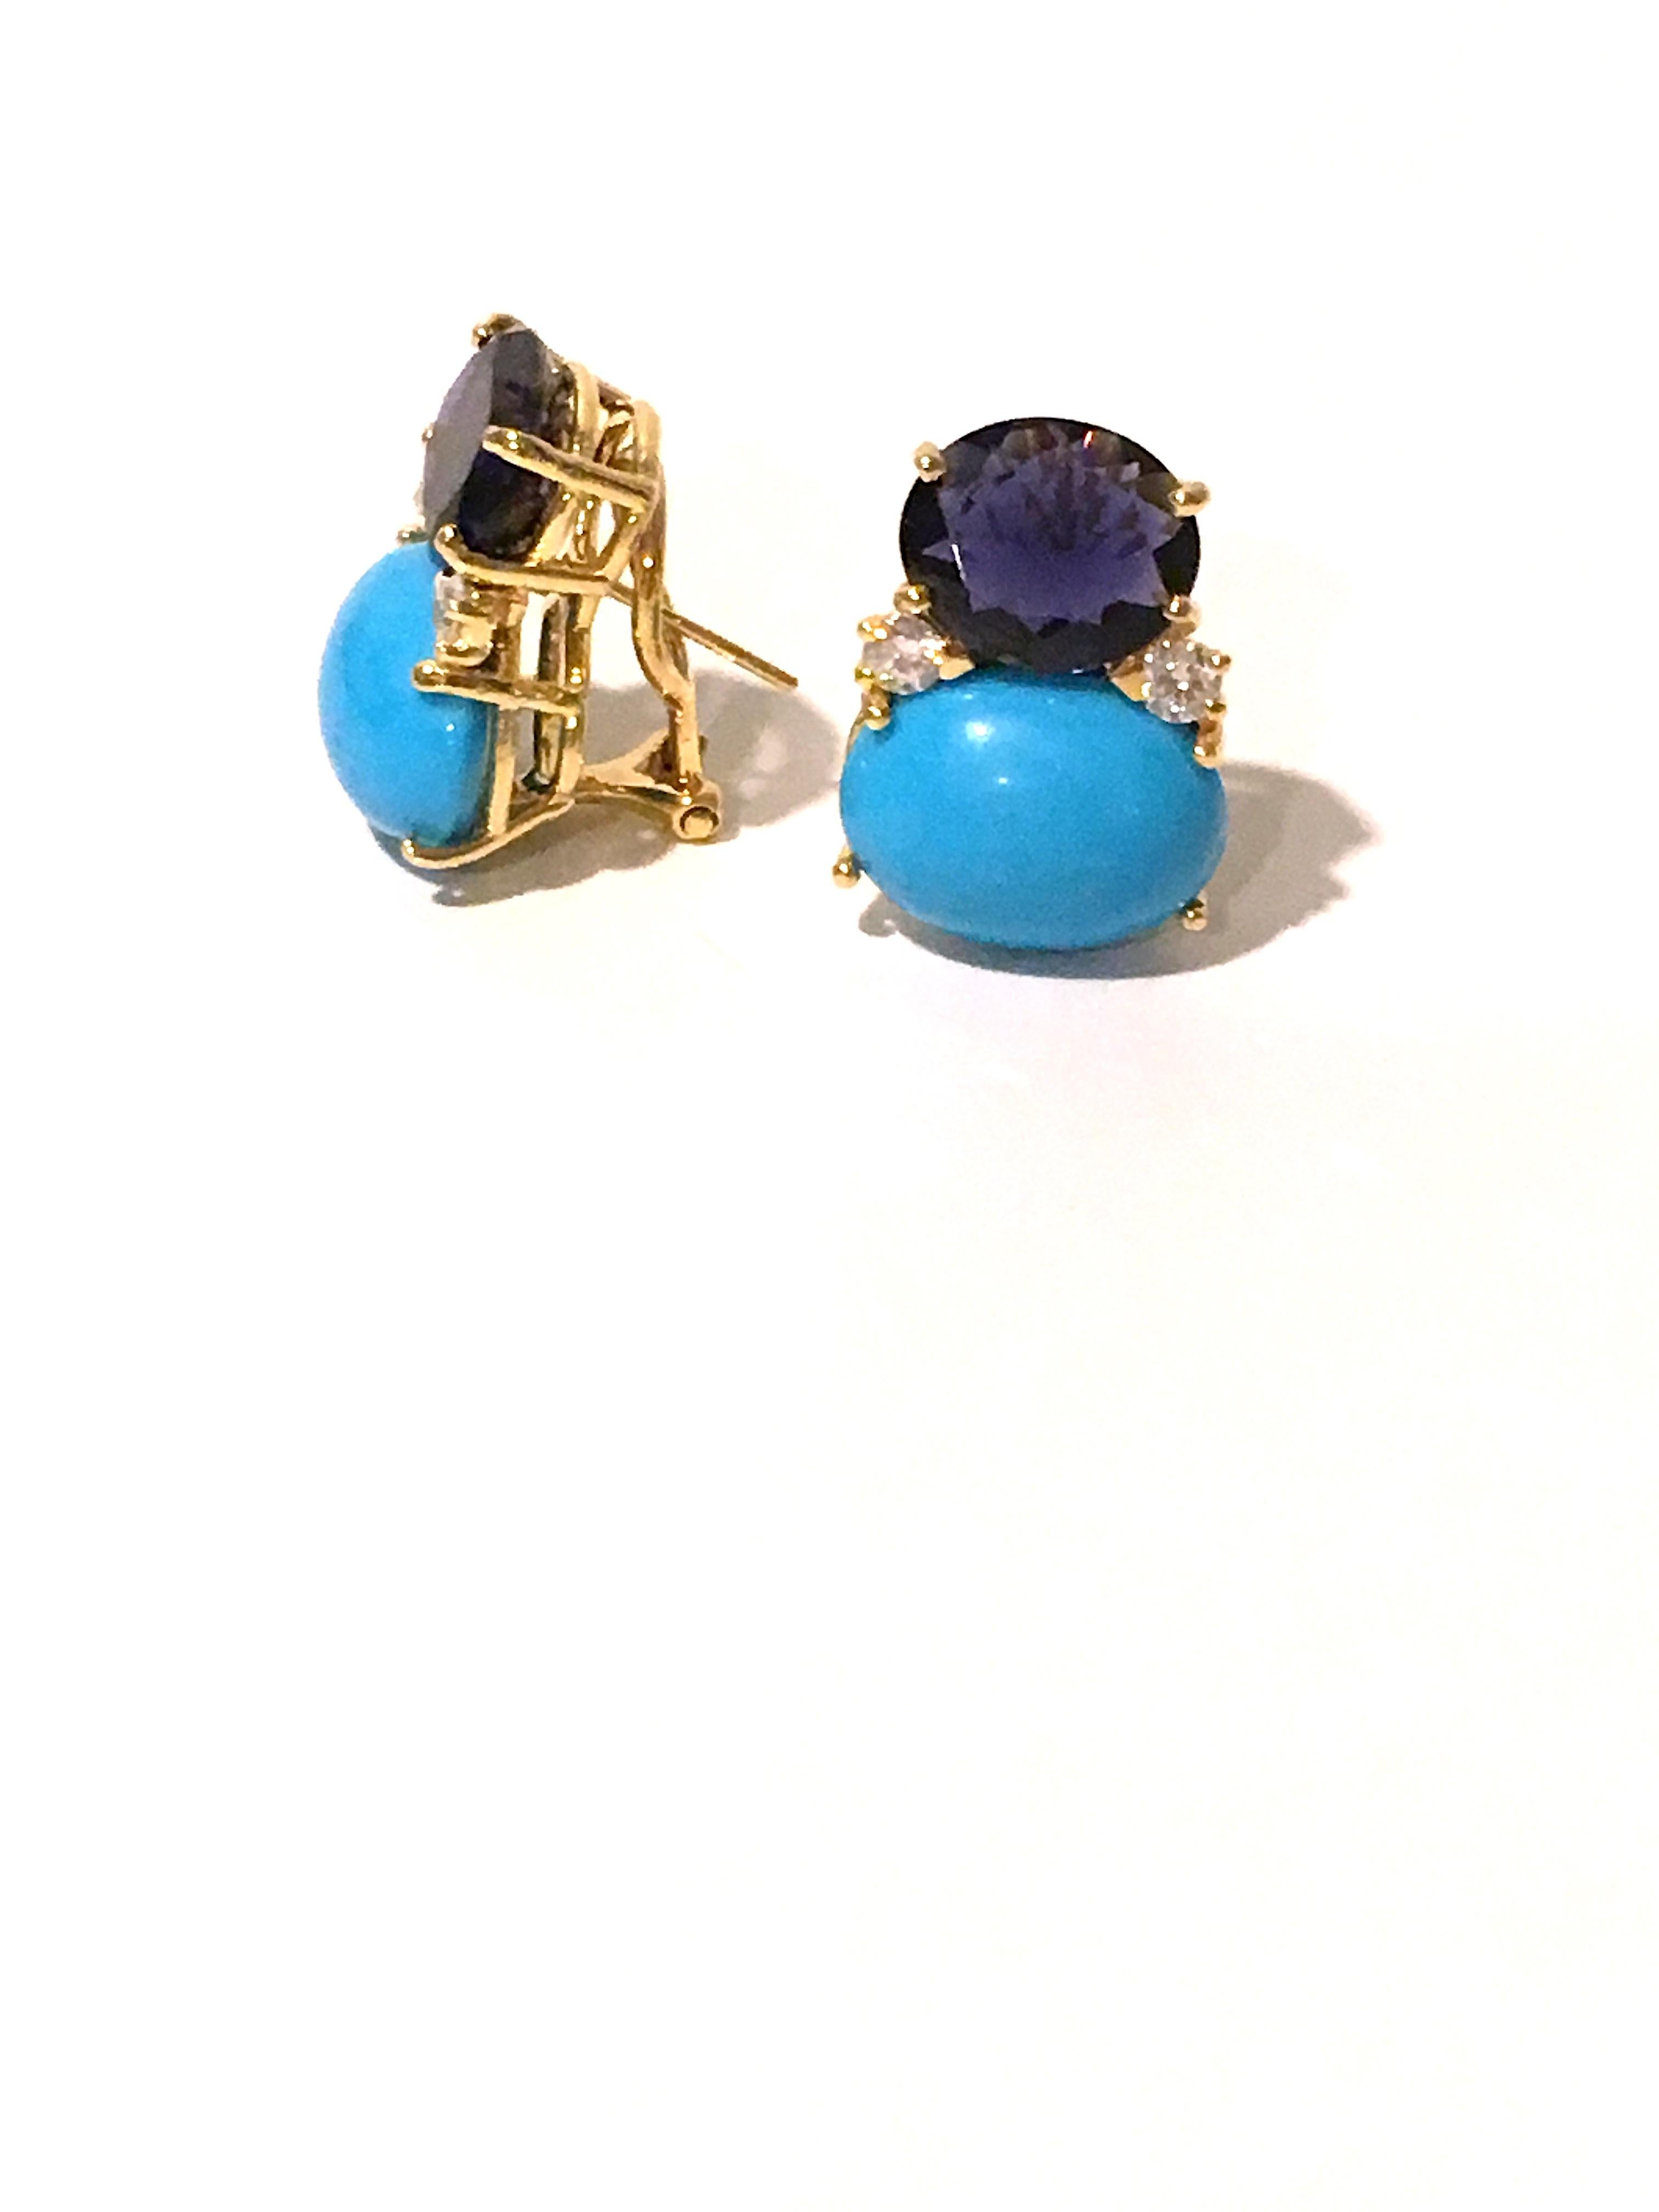 18kt Yellow Gold Large GUM DROP™ Earrings with Iolite, and Turquoise and diamonds. 
 
Clip or Pierced

The Iolite is approximately 5 cts each and the Turquoise is approximately 12 cts each, and 4 diamonds weighing approximately 0.60cts

The earrings